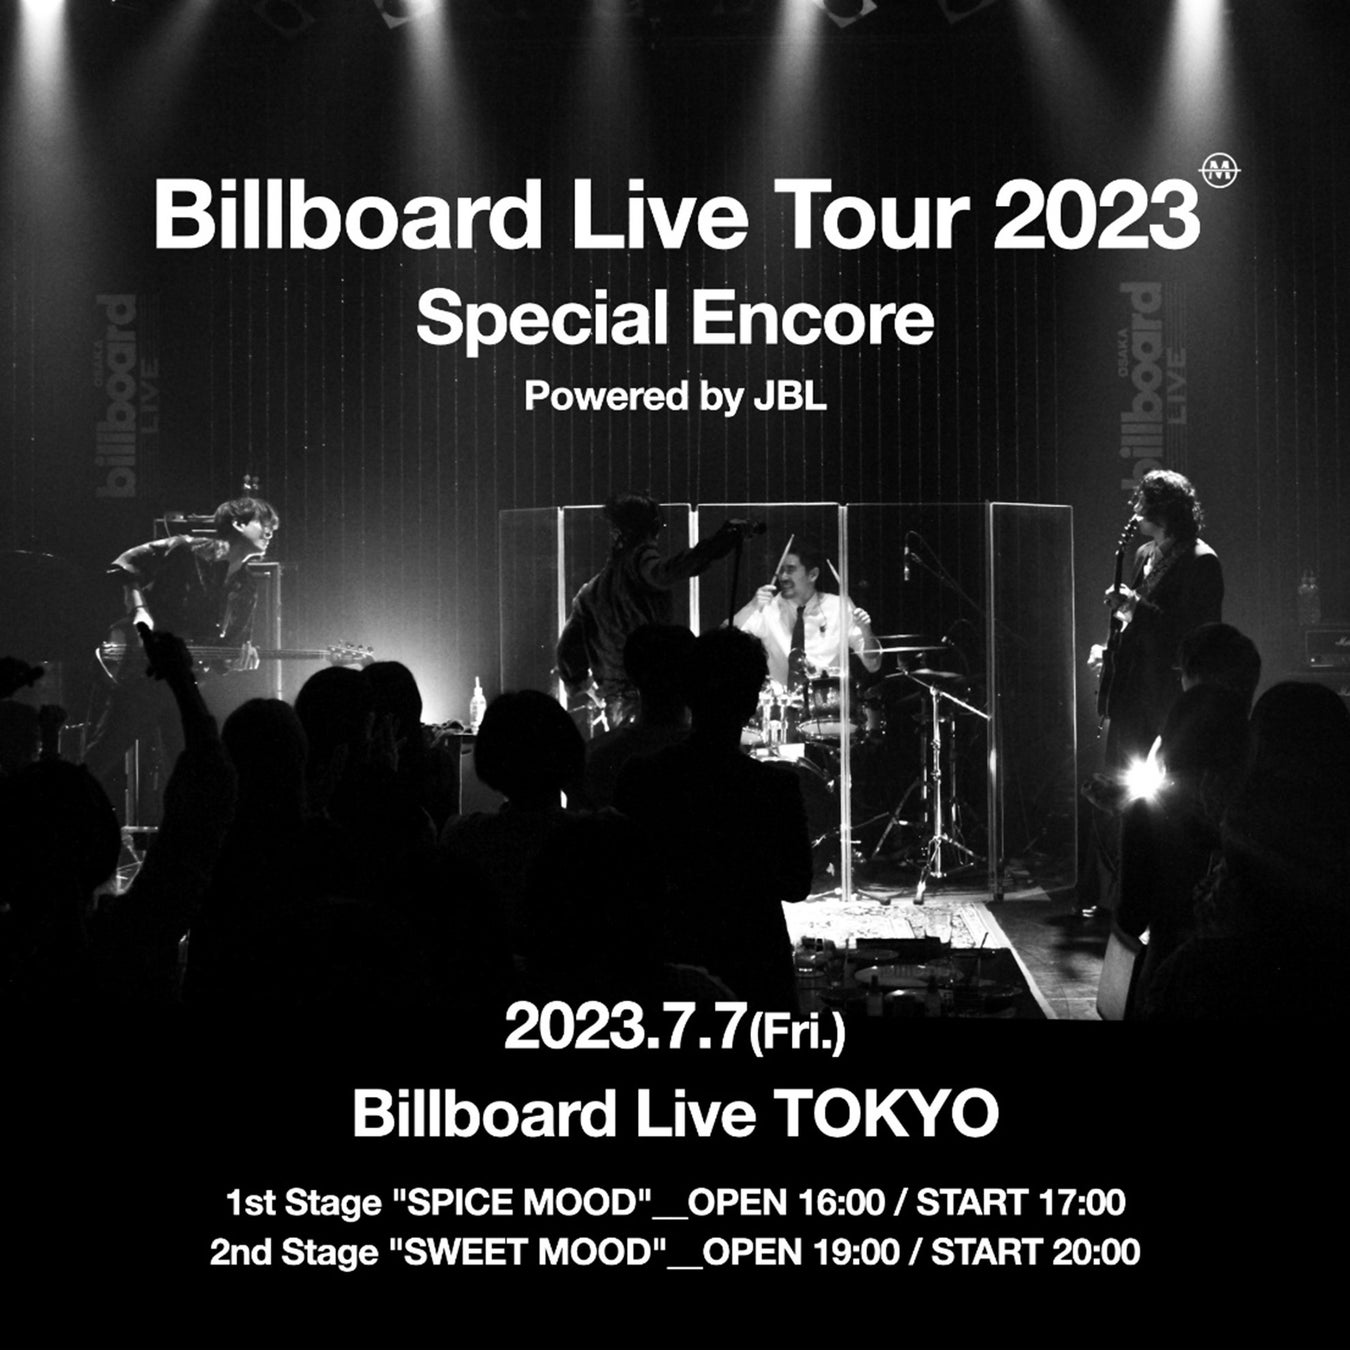 I Don’t Like Mondays.“Billboard Live Tour 2023 Special Encore” Powered by JBL